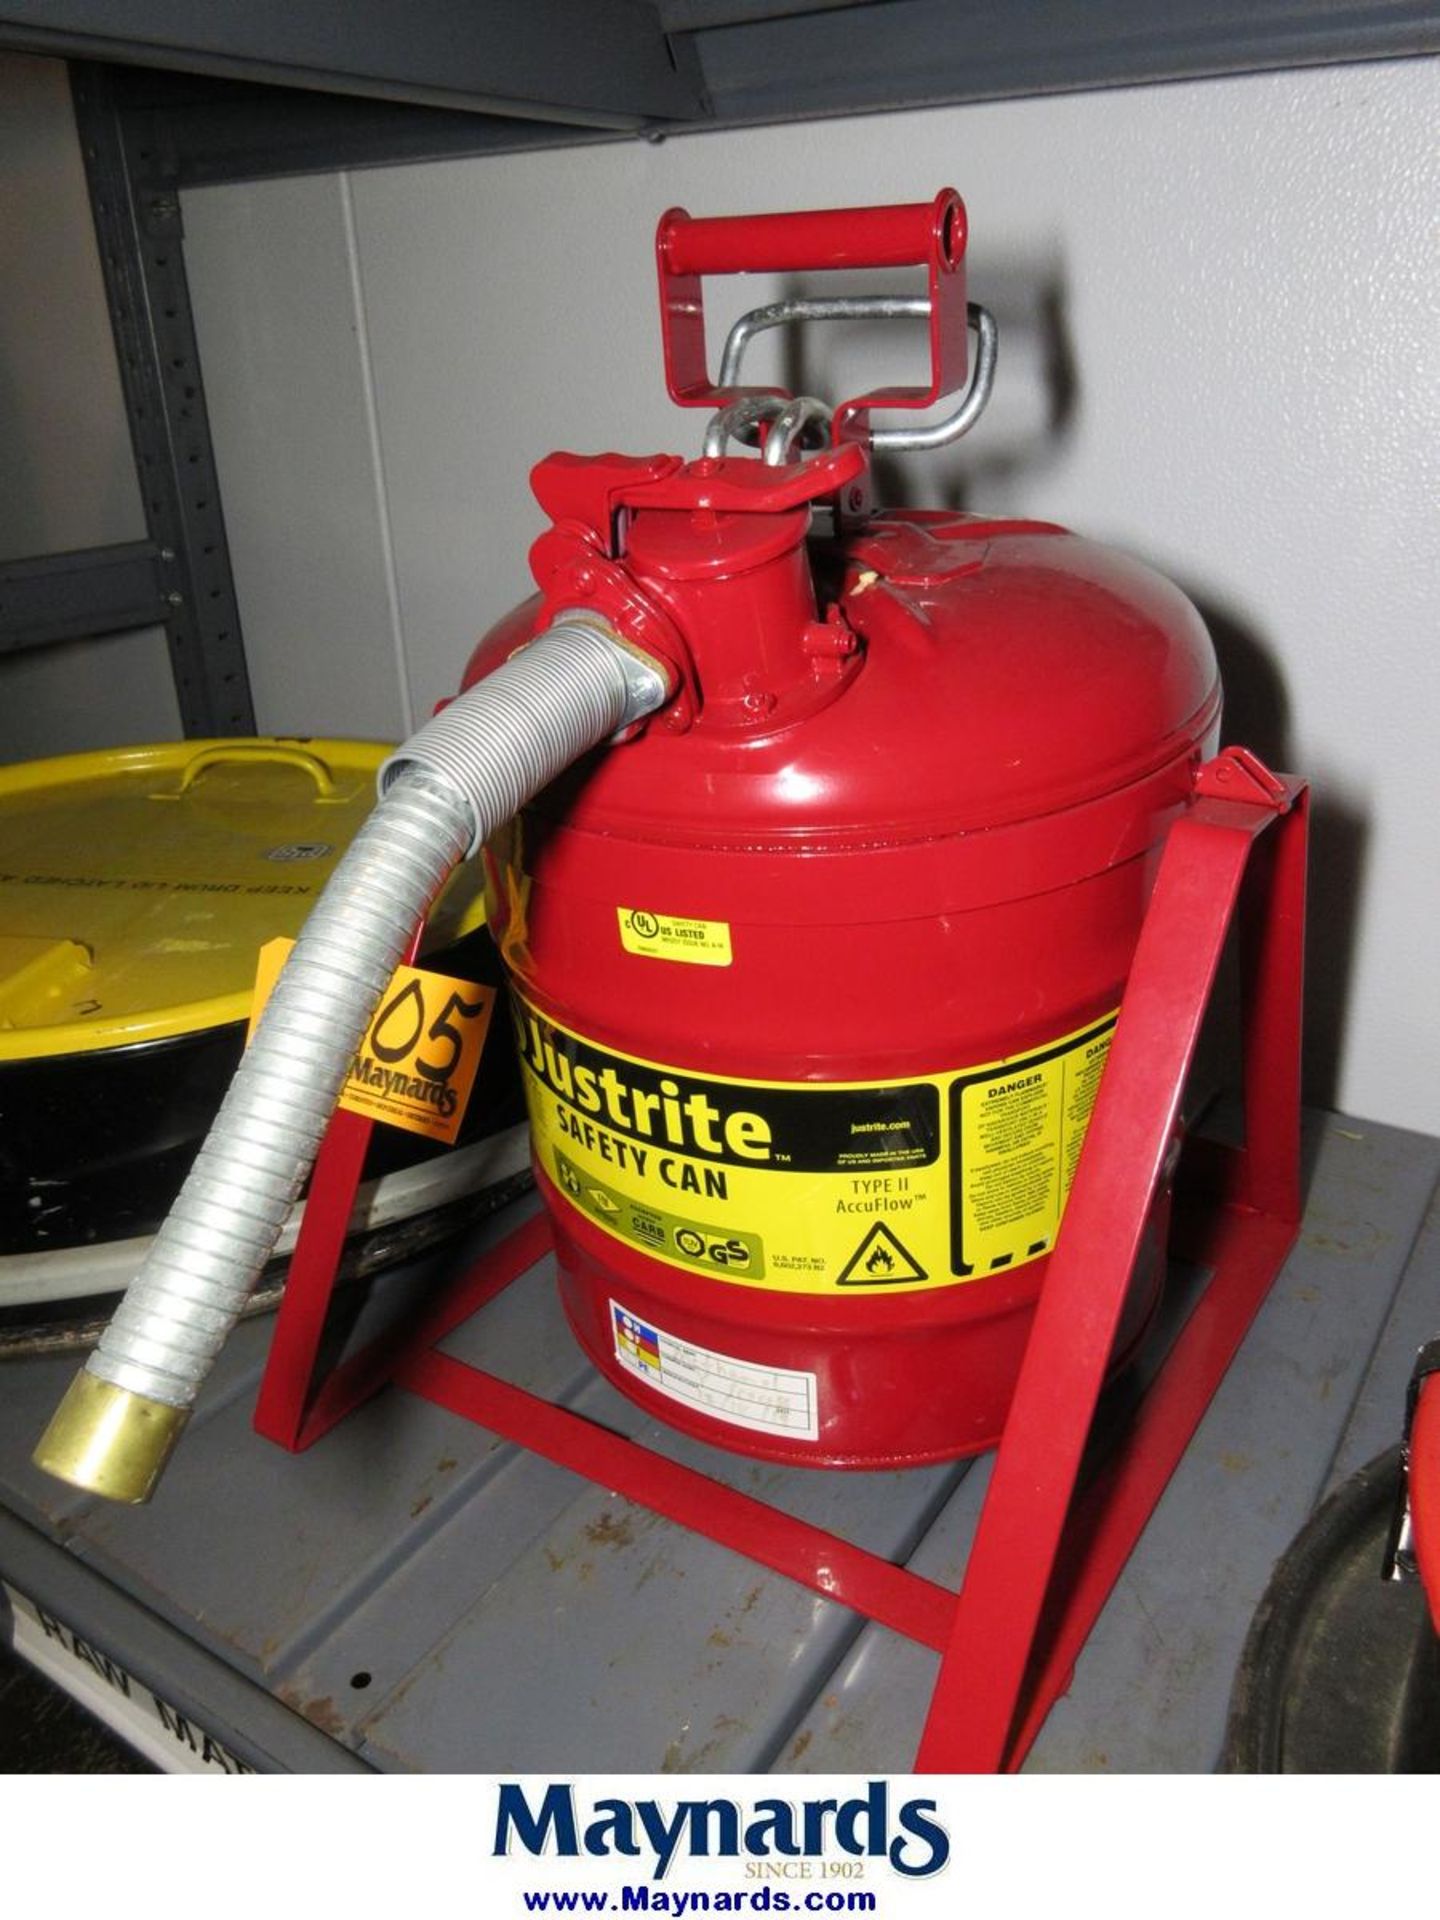 Justrite Type II Accuflow 5-Gal. Safety Can - Image 4 of 5